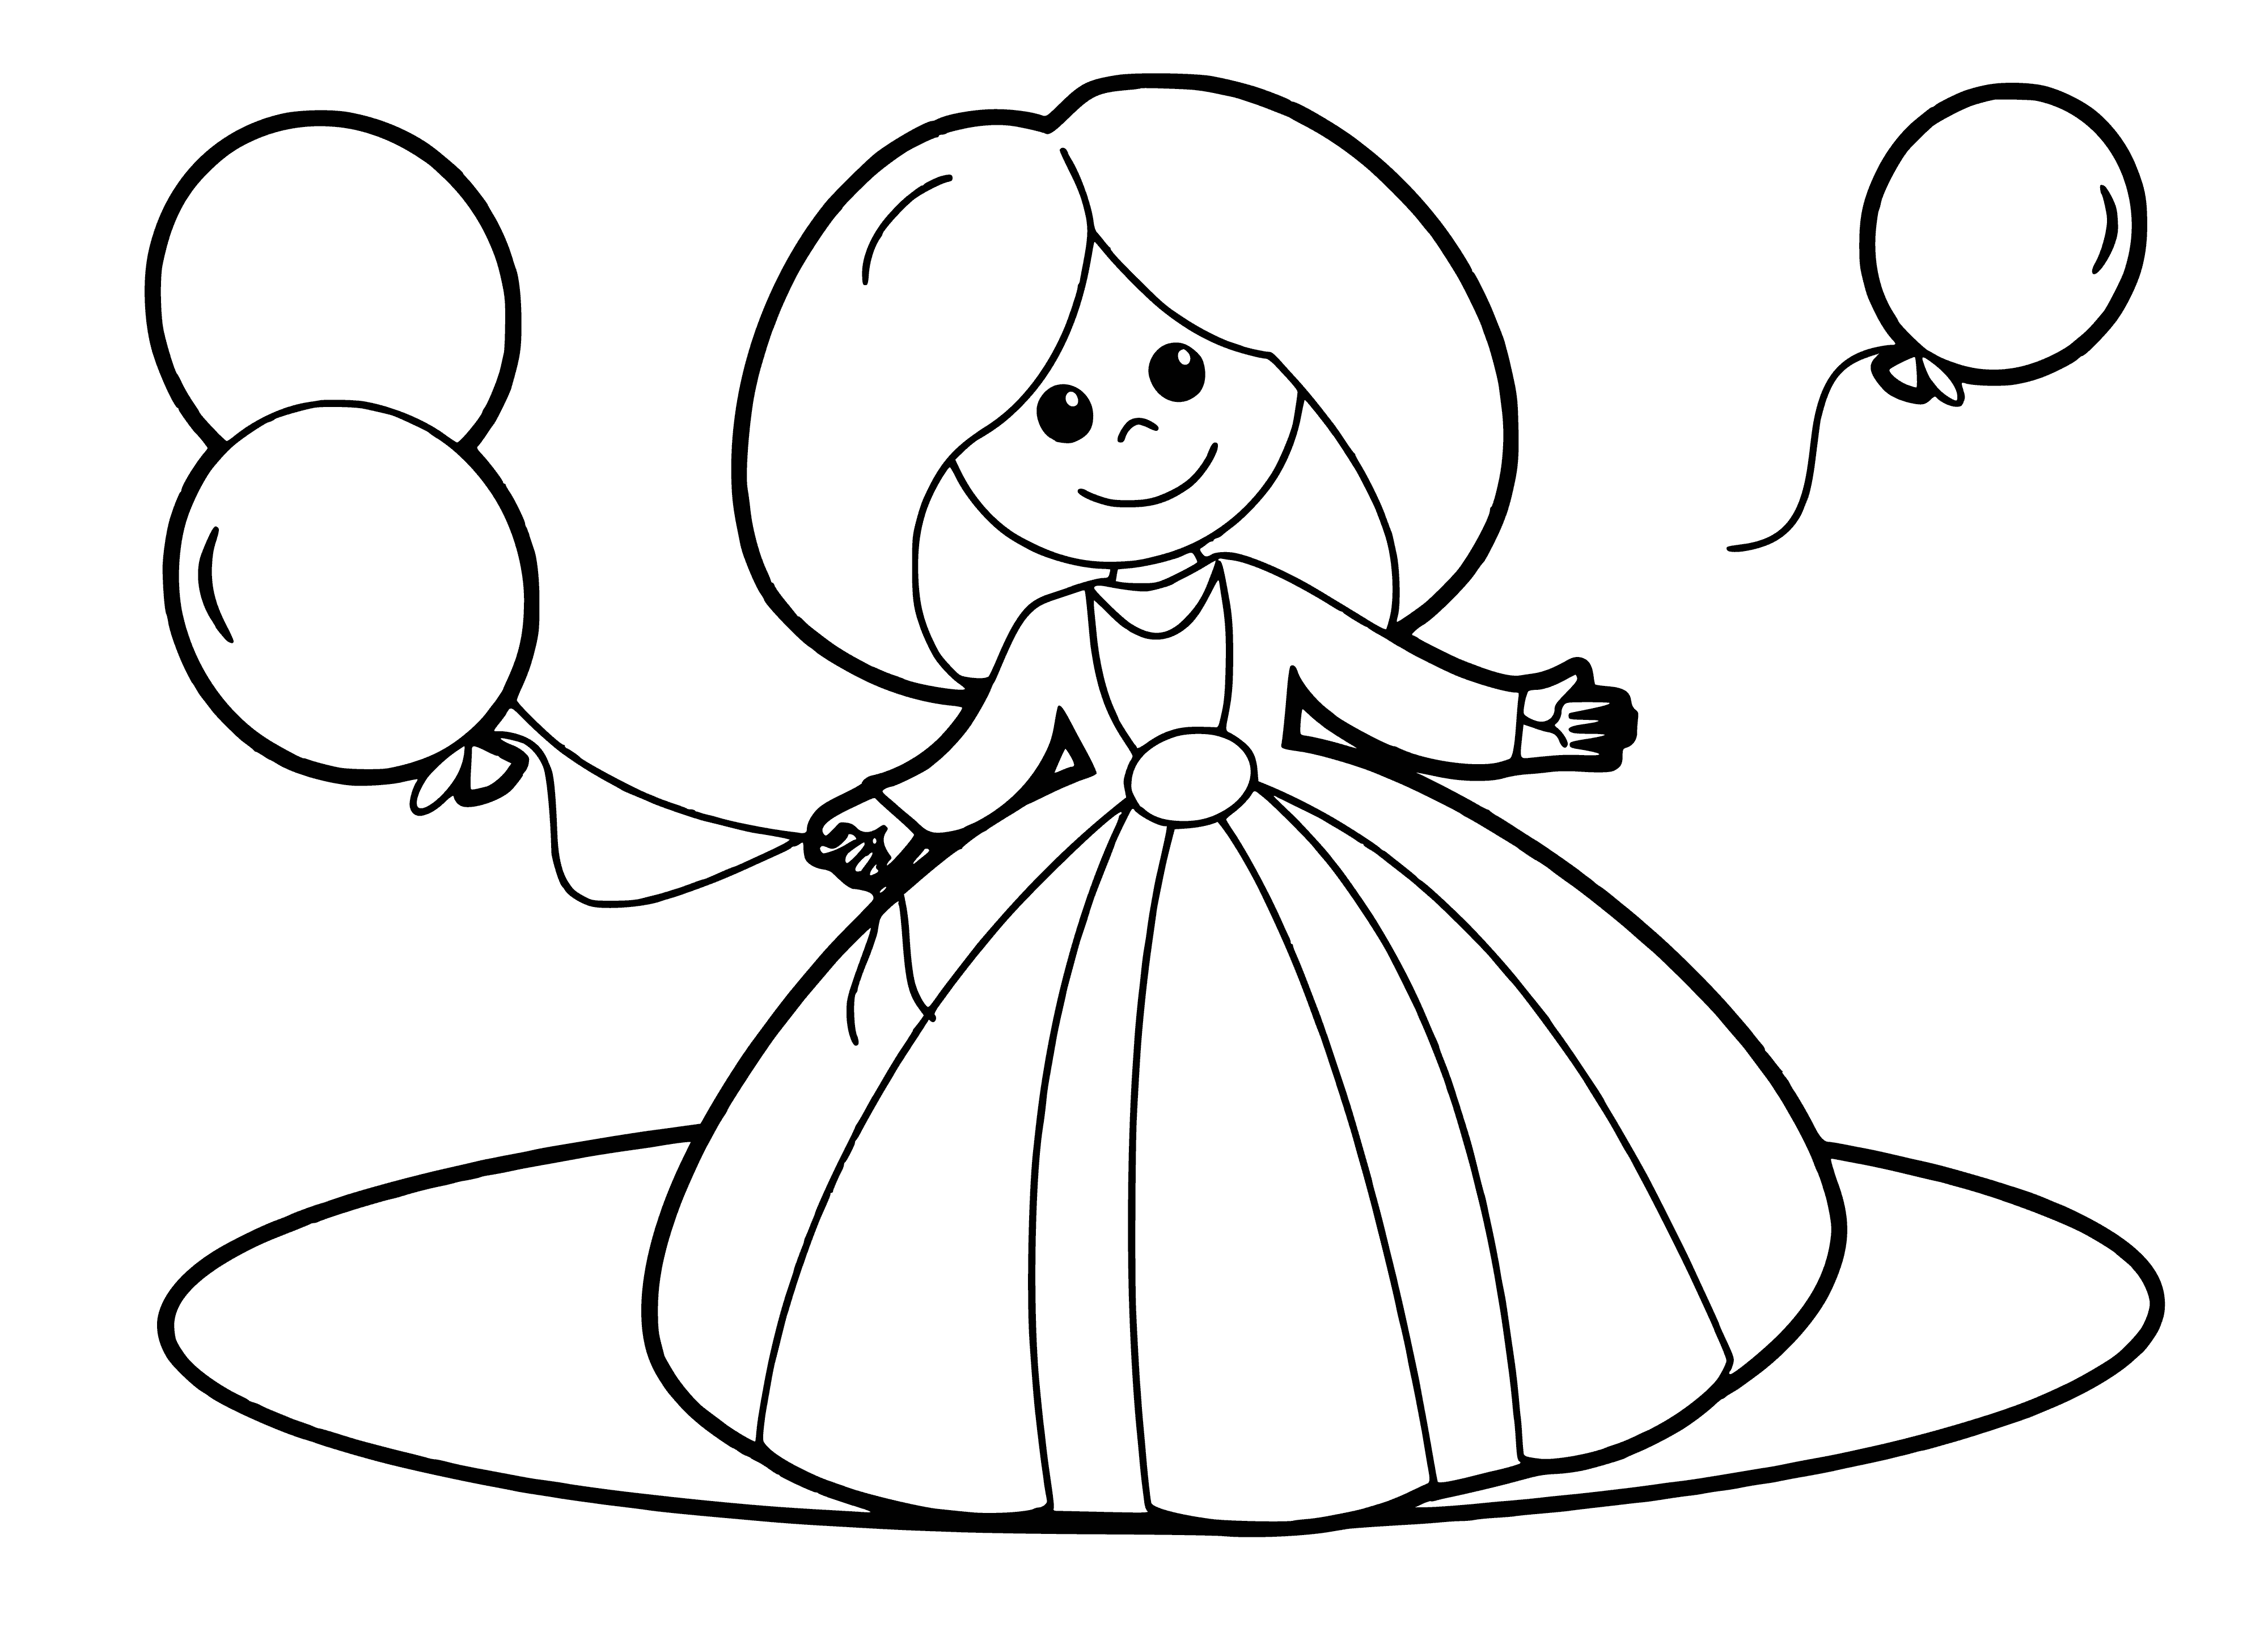 Girl with balls coloring page